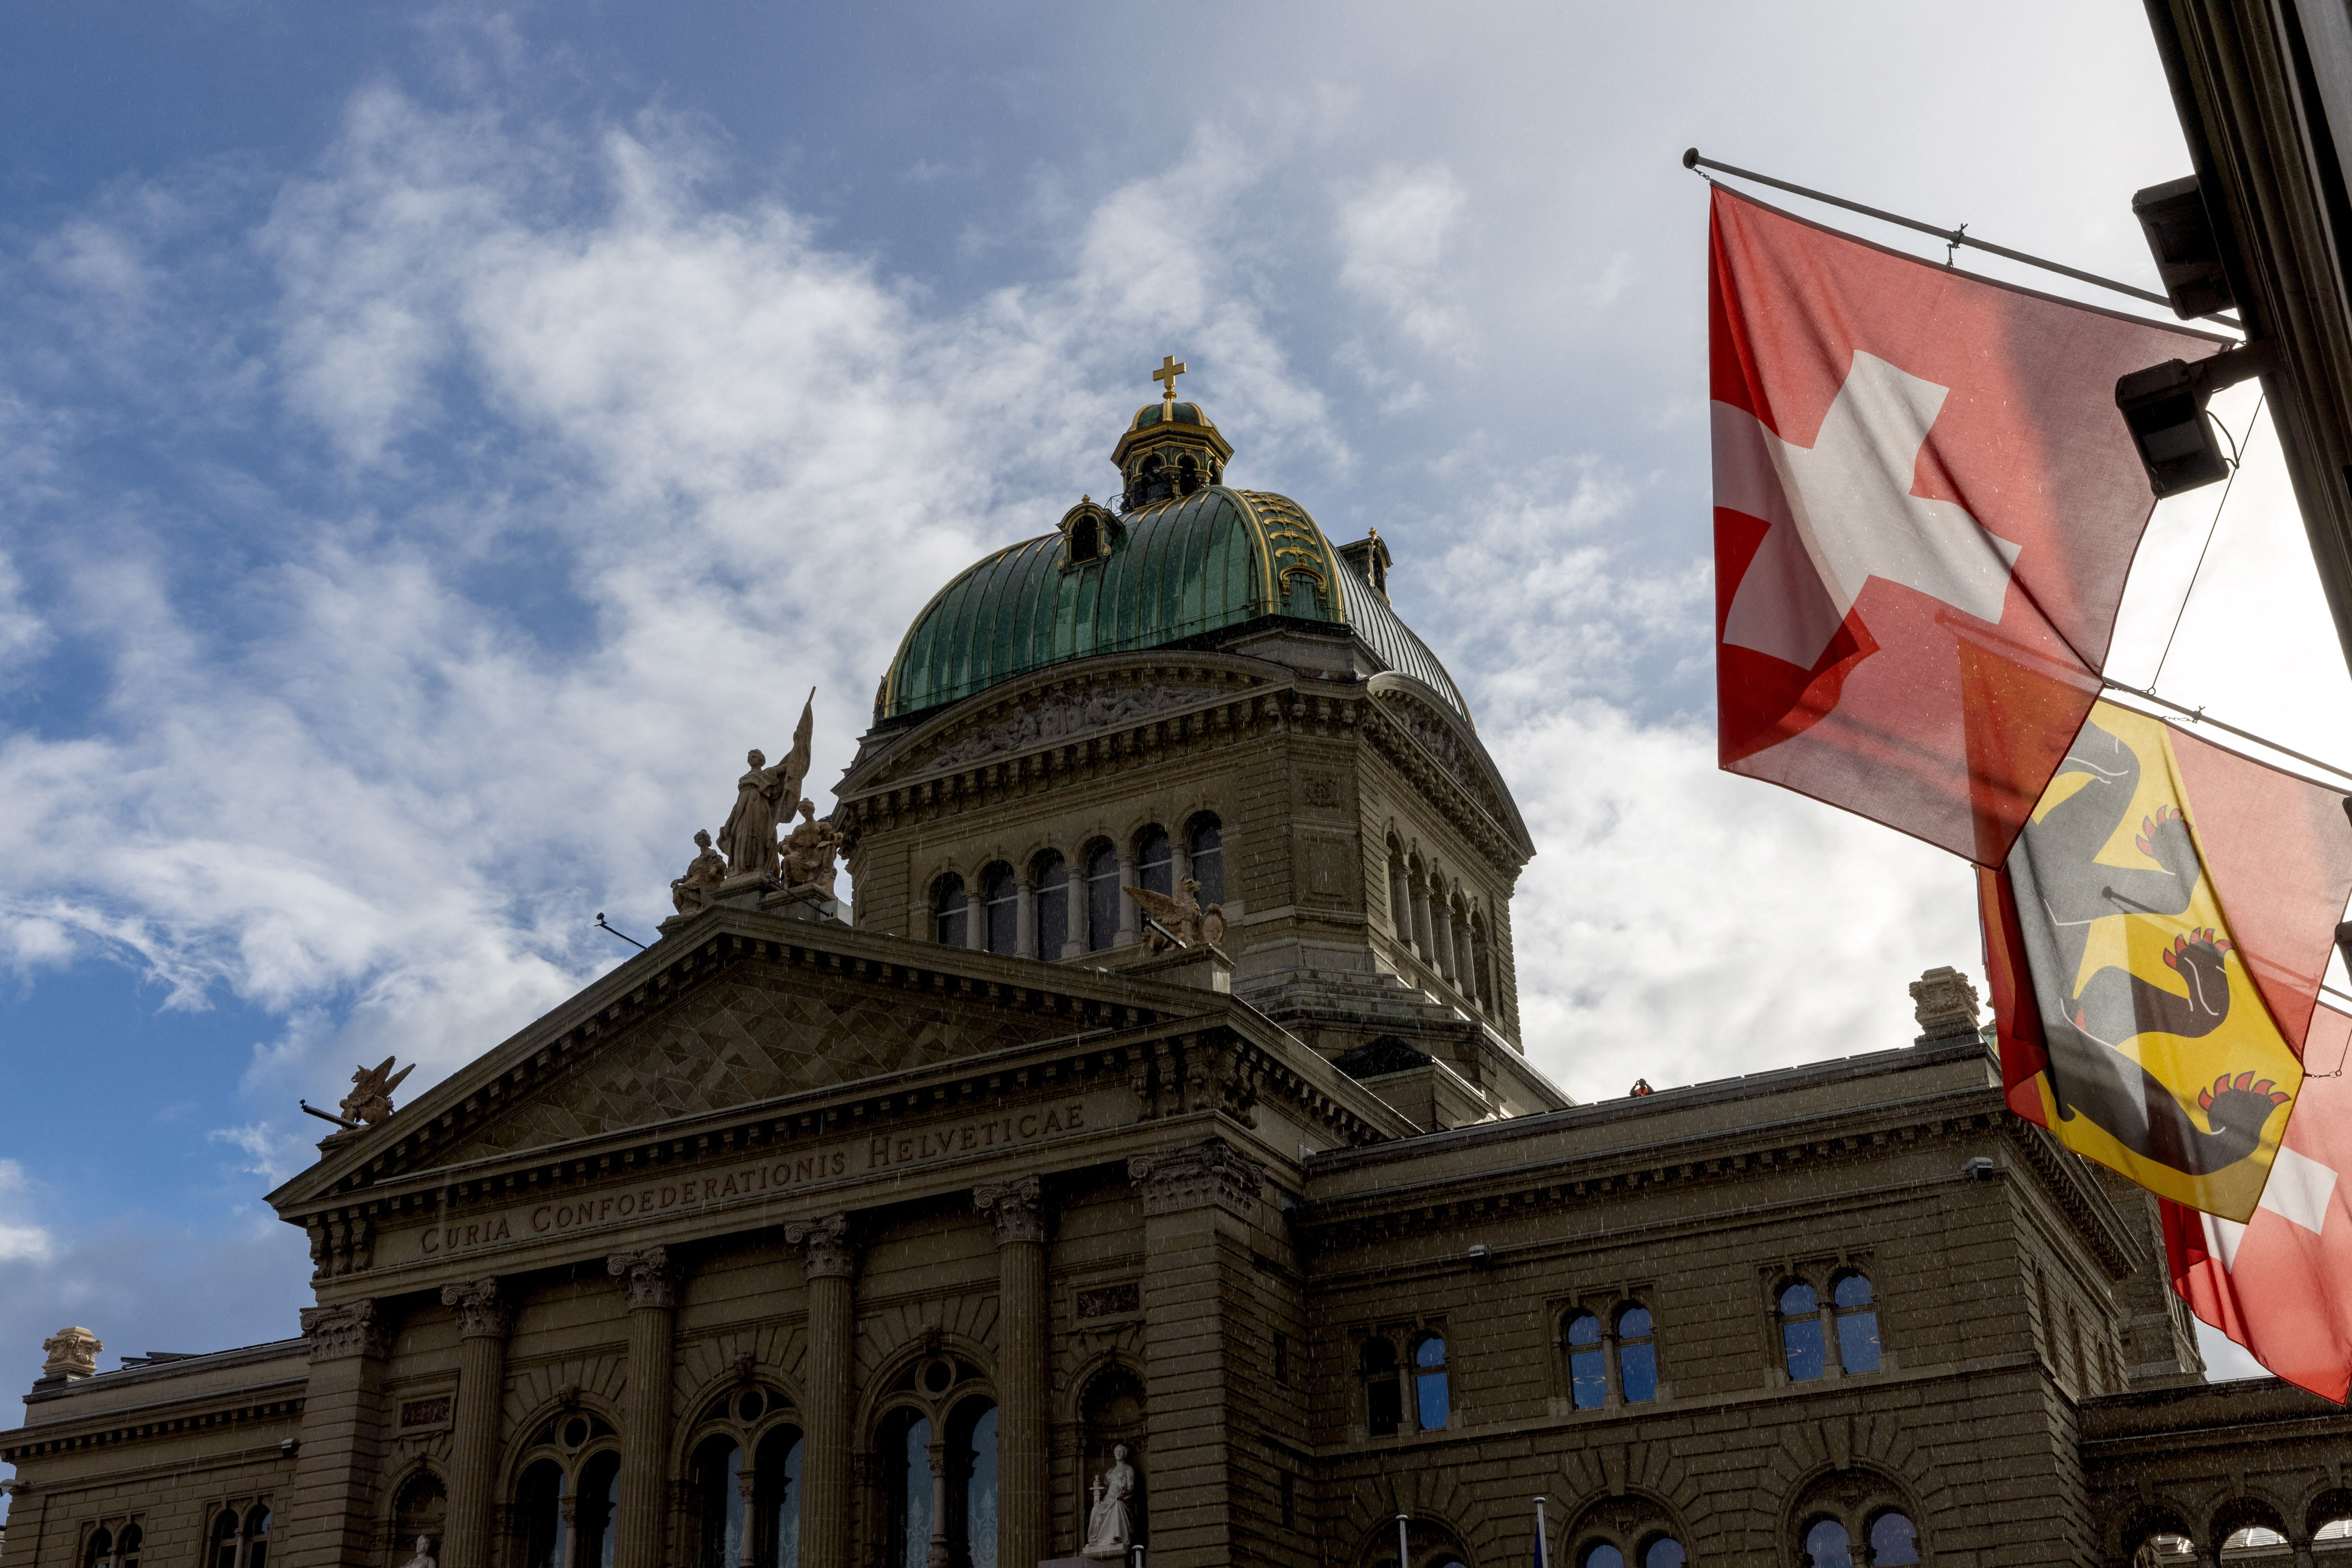 The Swiss Parliament House (Bundeshaus) is seen in Bern